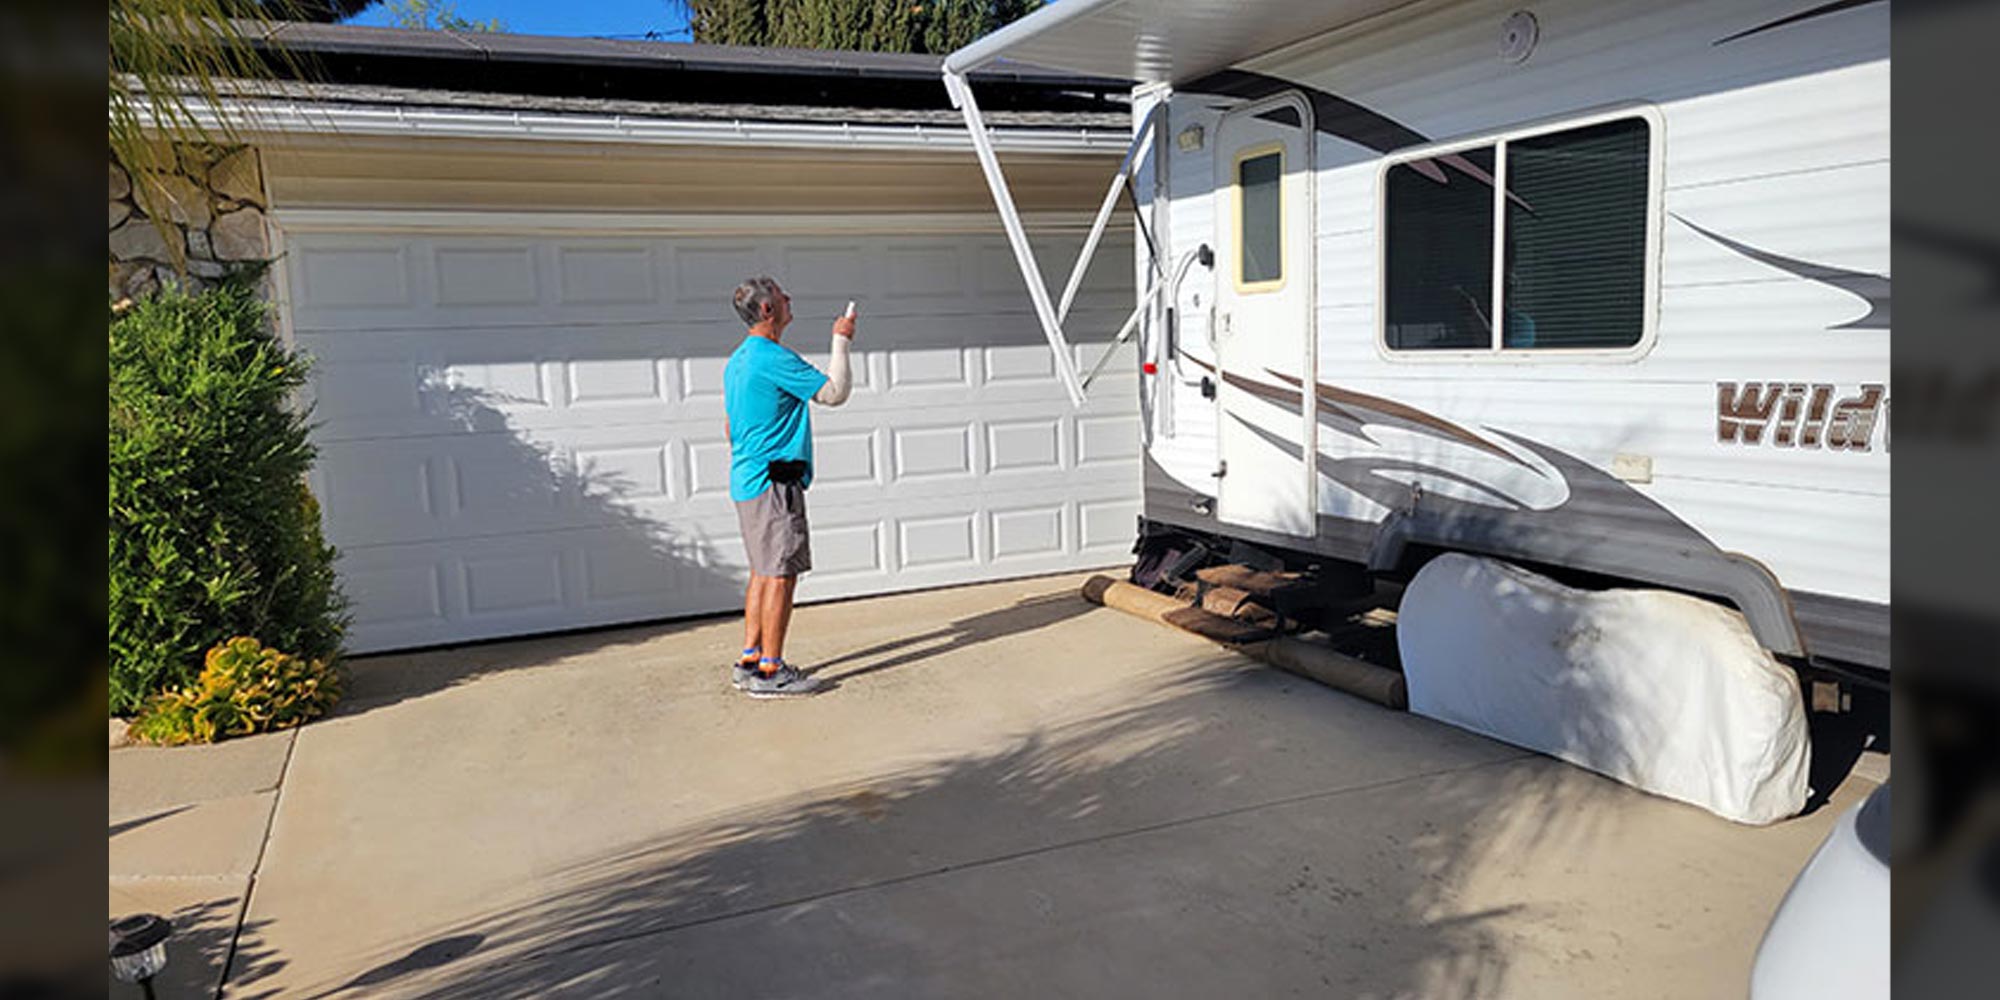 a man powers the remote control awning of an RV trailer parked in a residential driveway